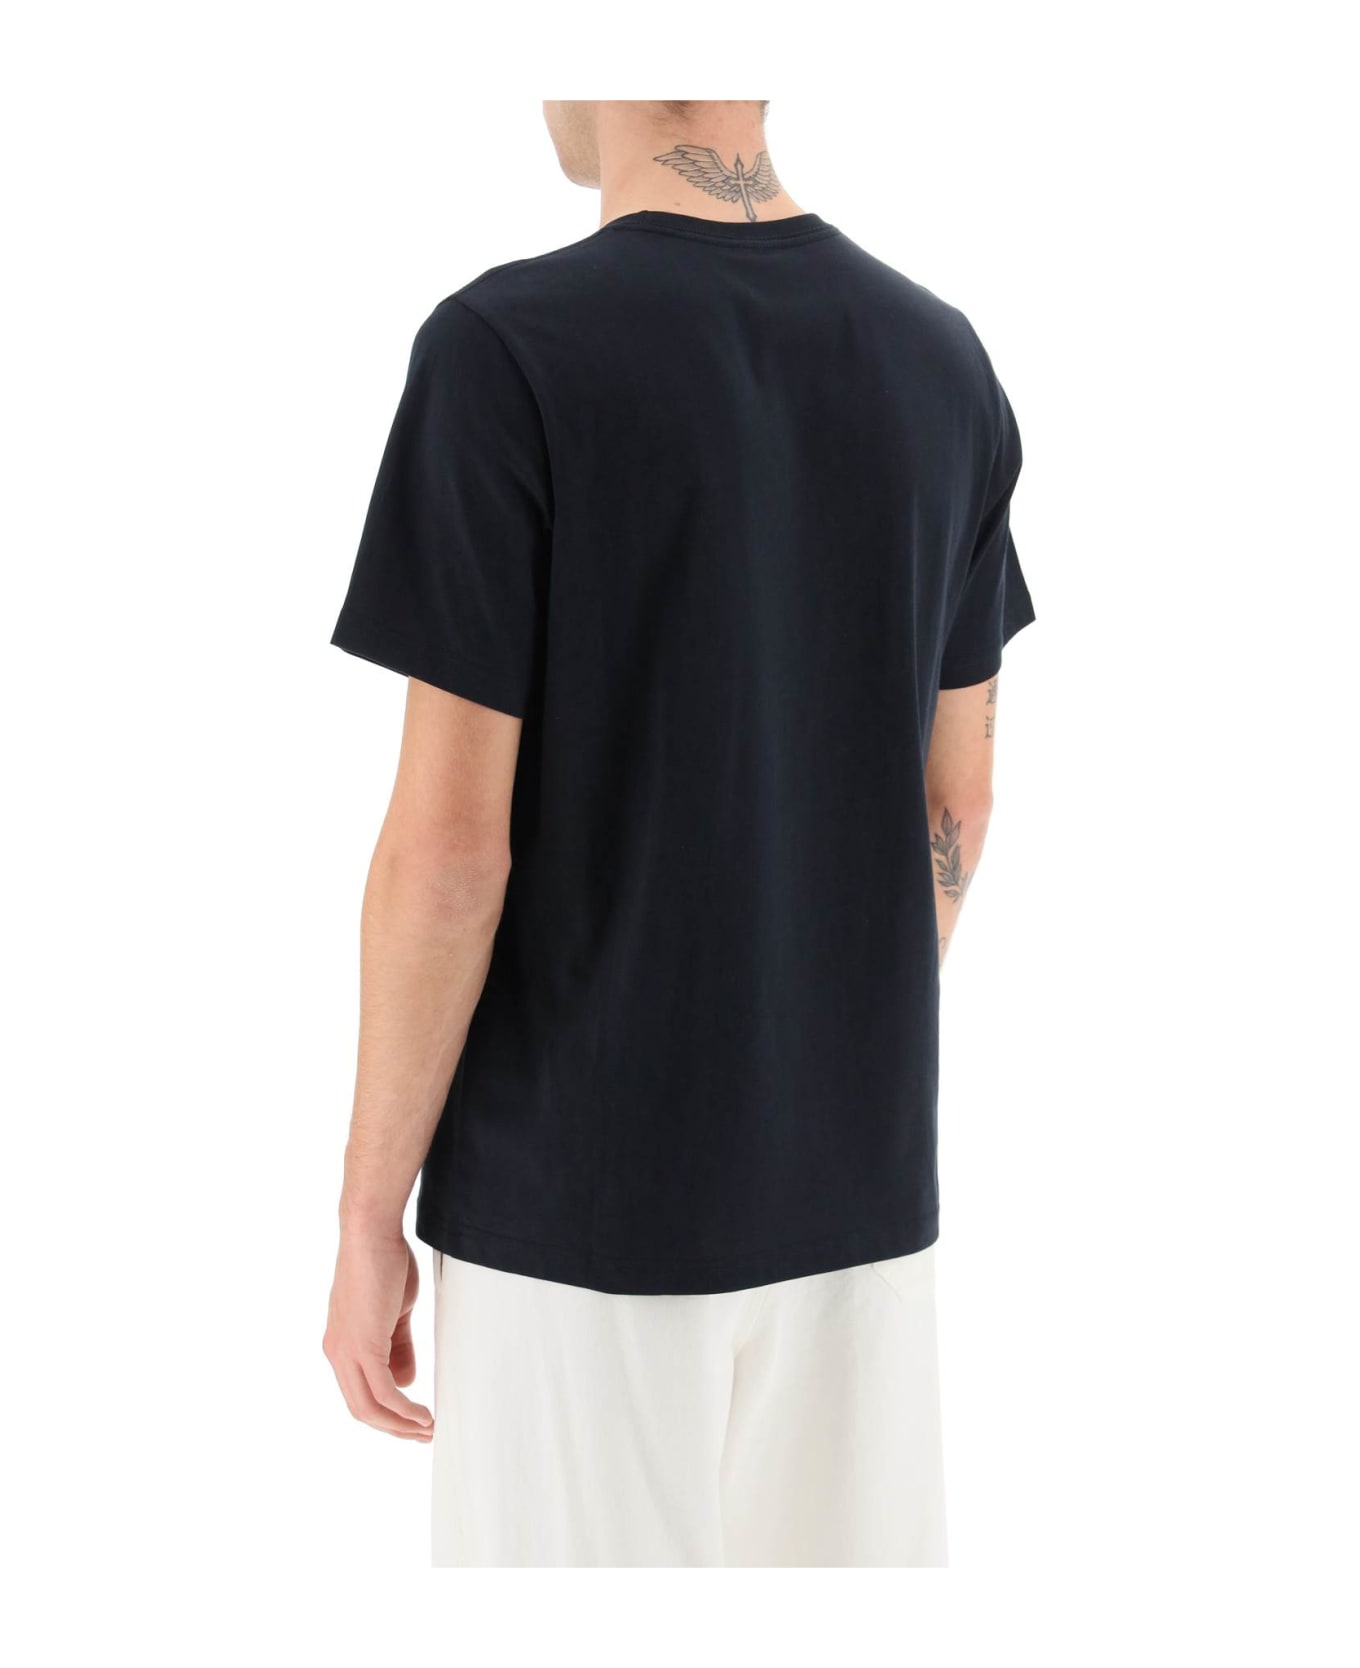 PS by Paul Smith Organic Cotton T-shirt - VERY DARK NAVY (Blue) シャツ